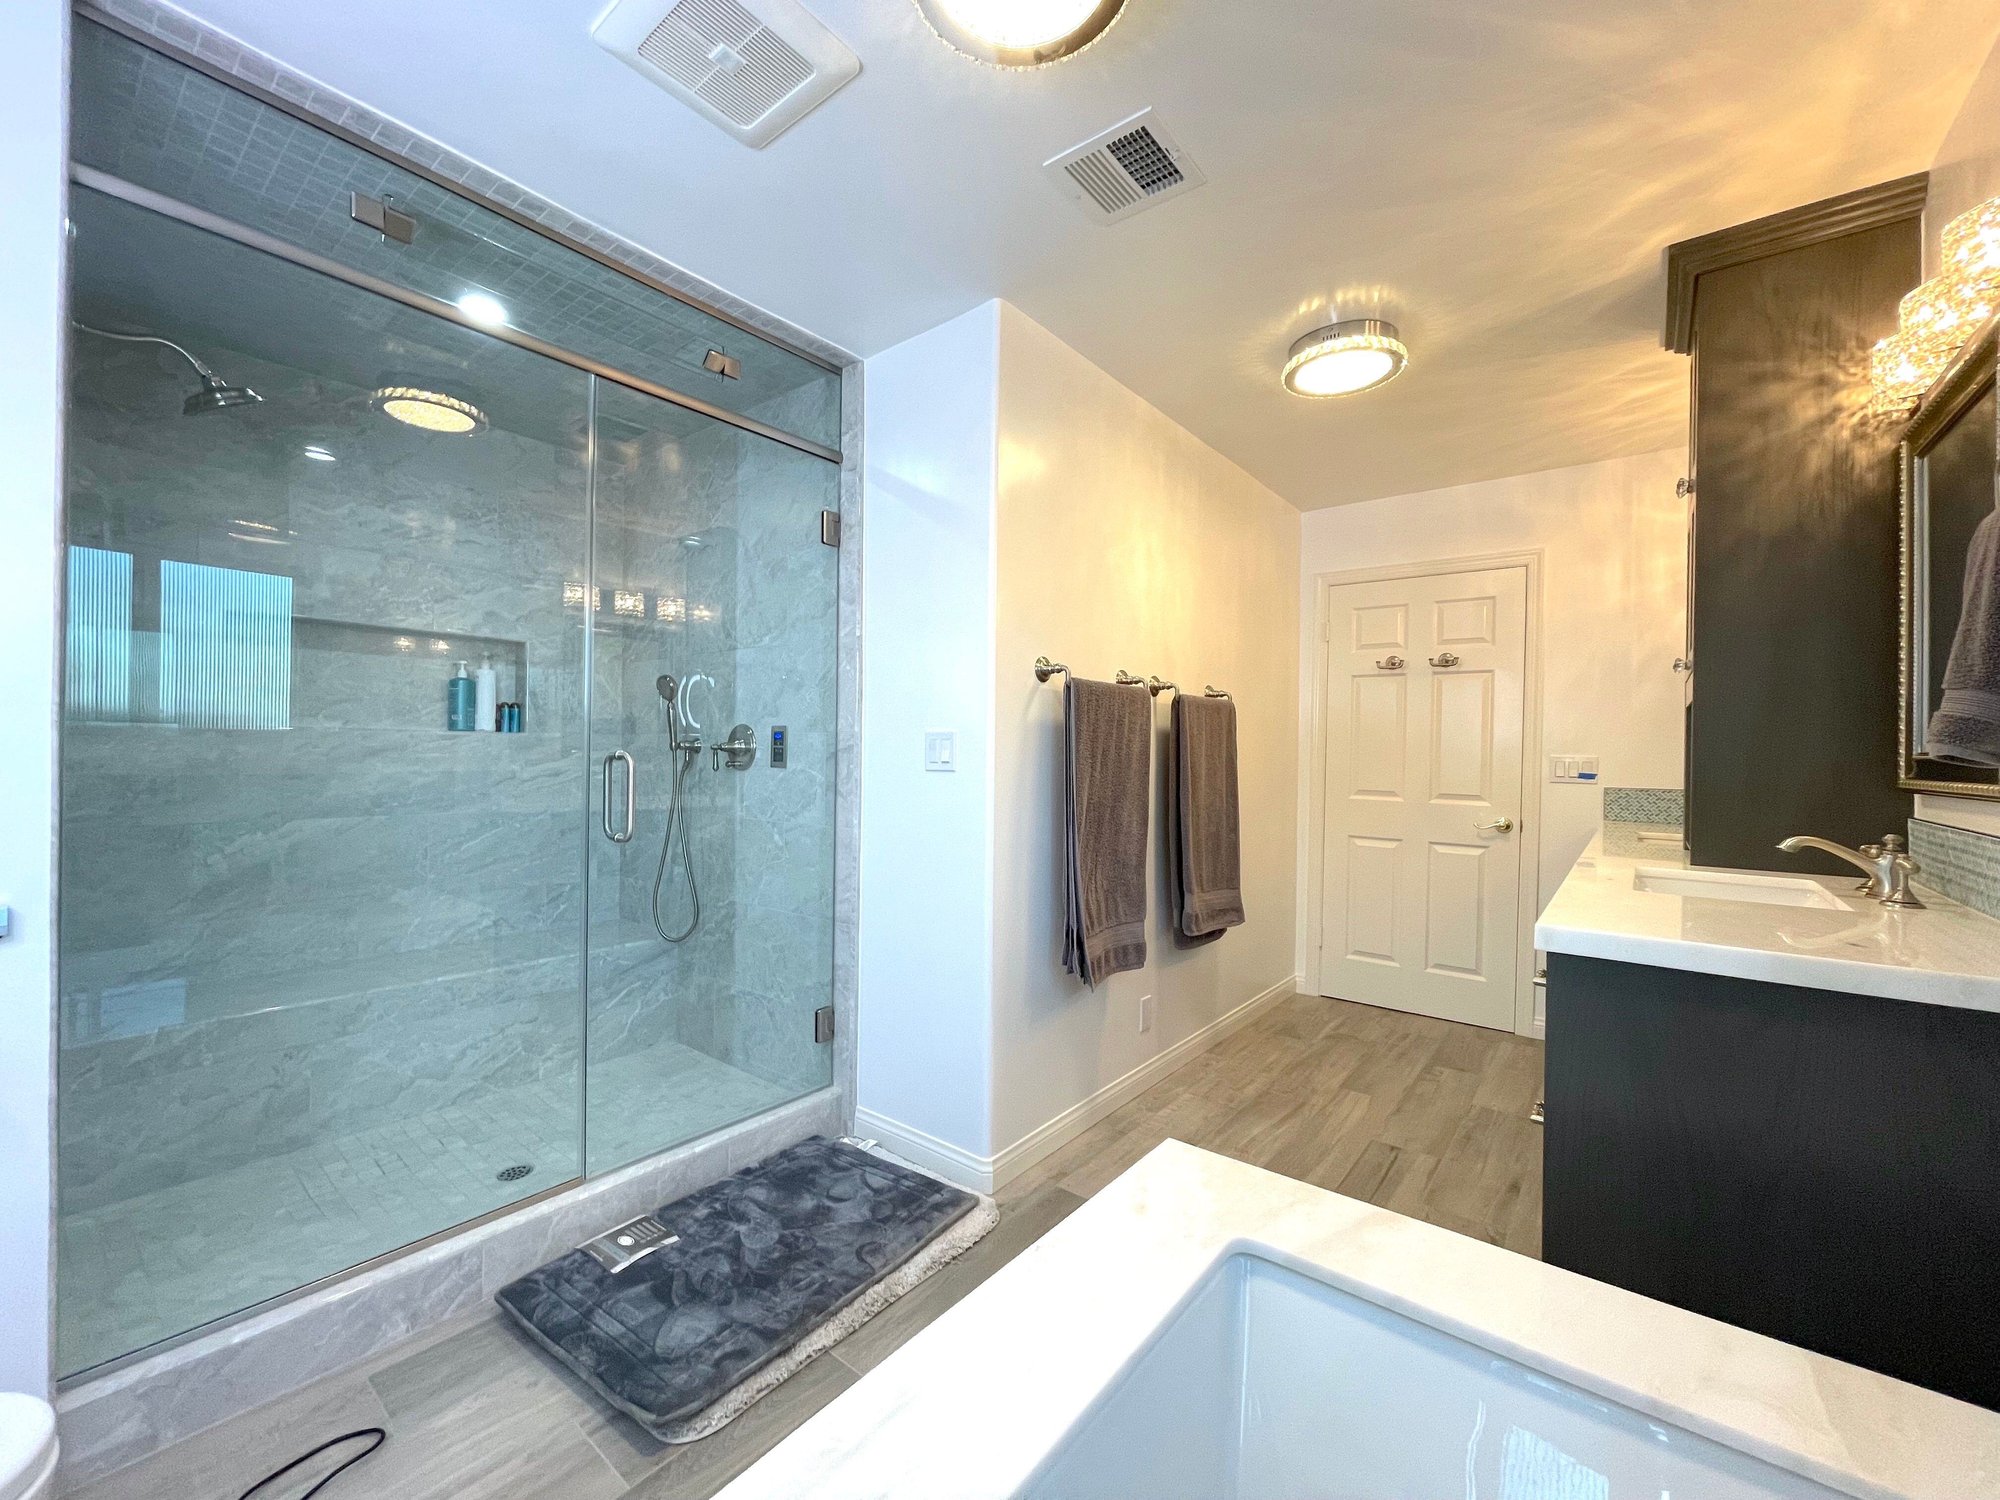 glass shower enclosure - Master bath remodel - best remodel near me - torrance - bay cities construction